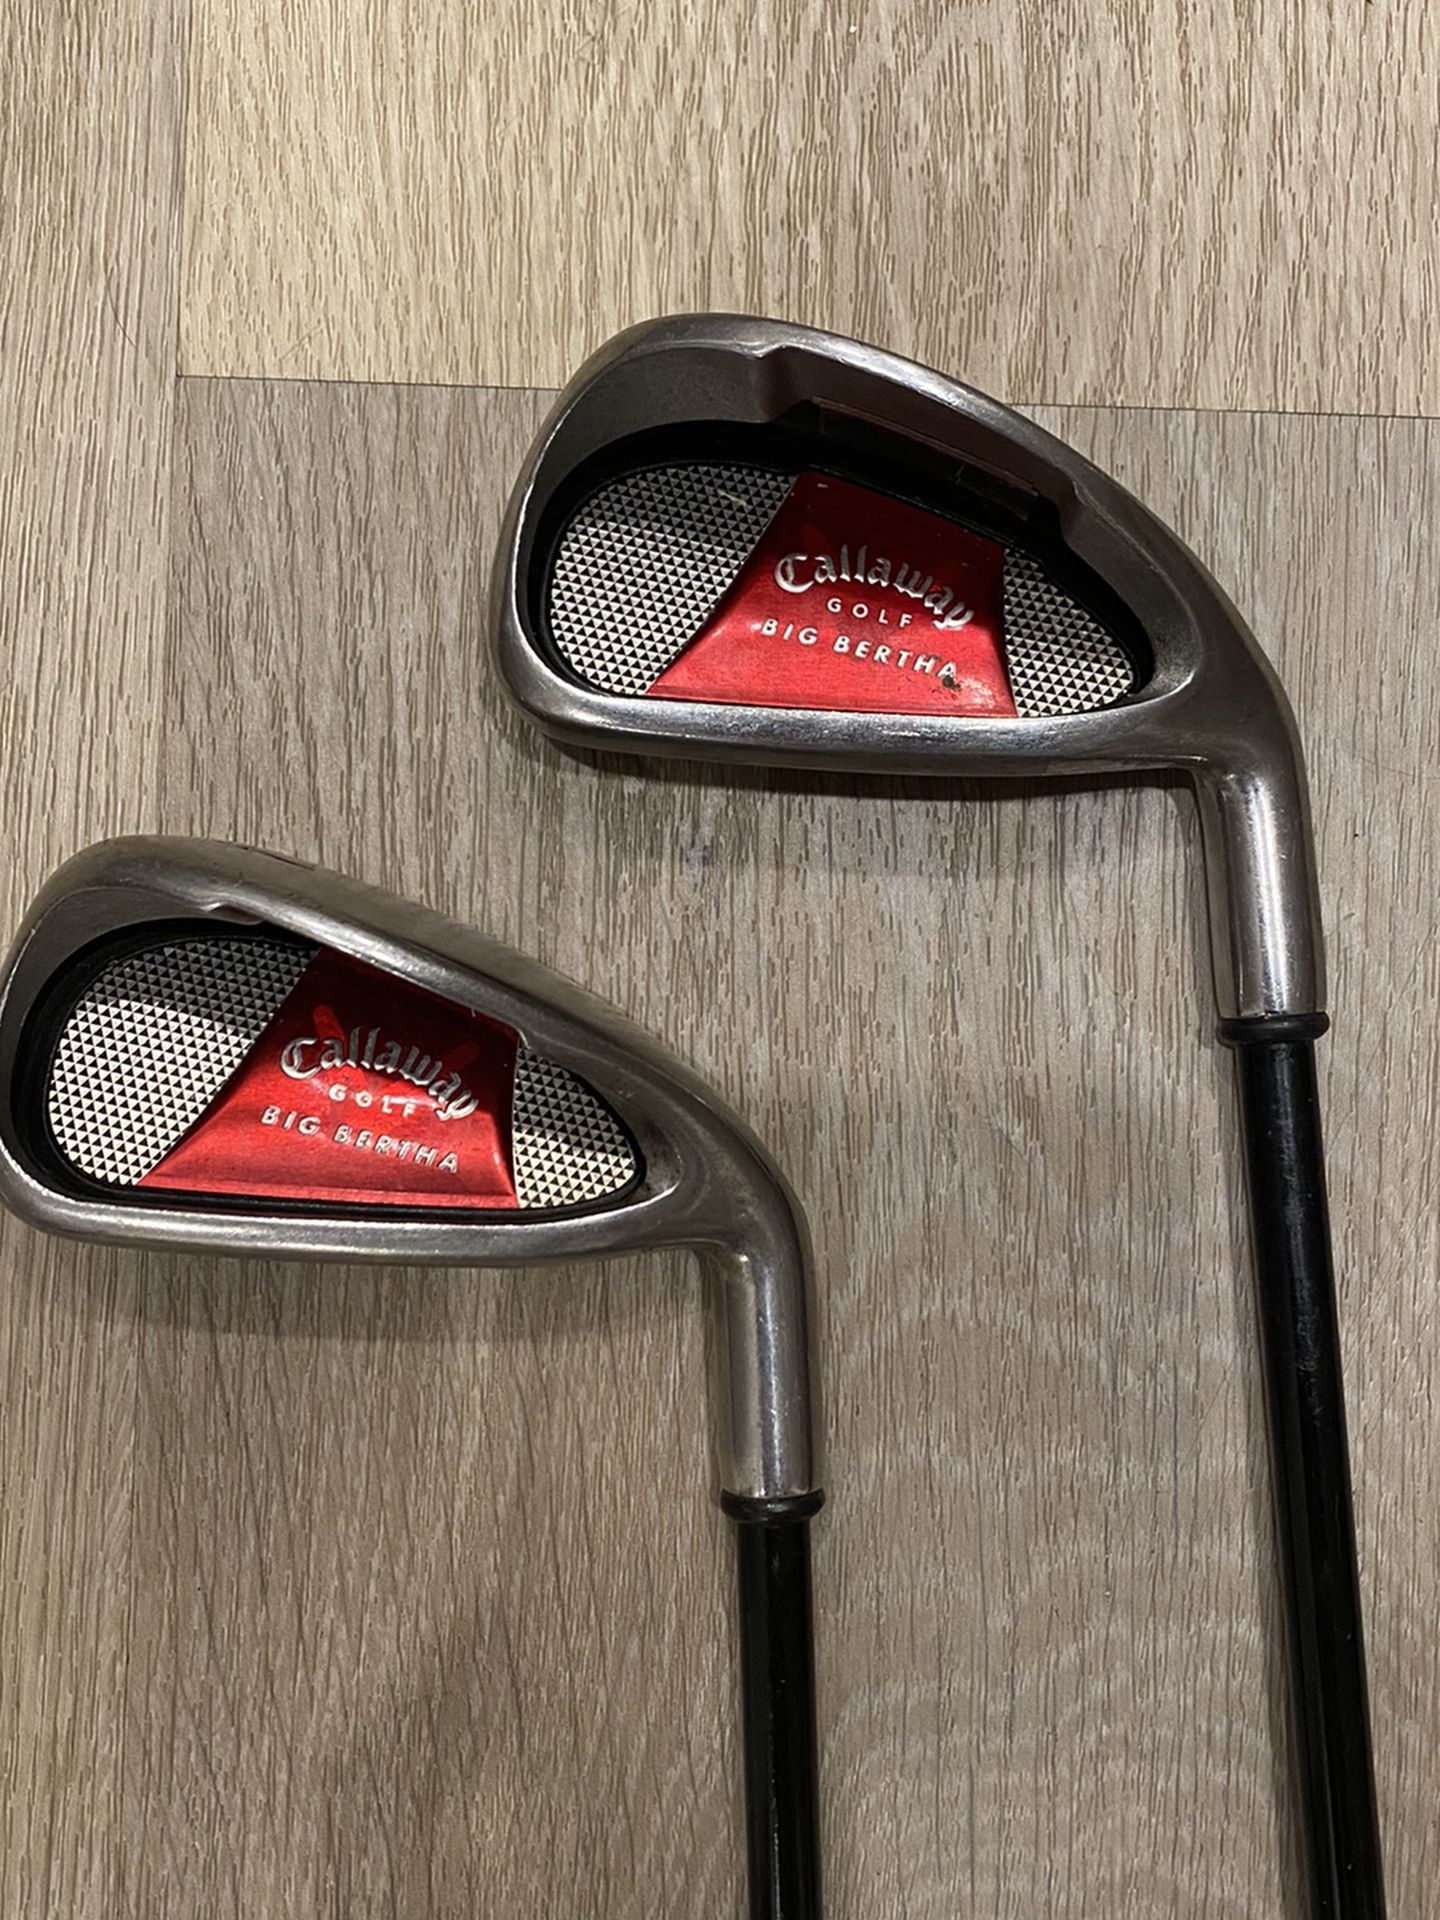 Callaway Golf Clubs Hybrids 3 And 4